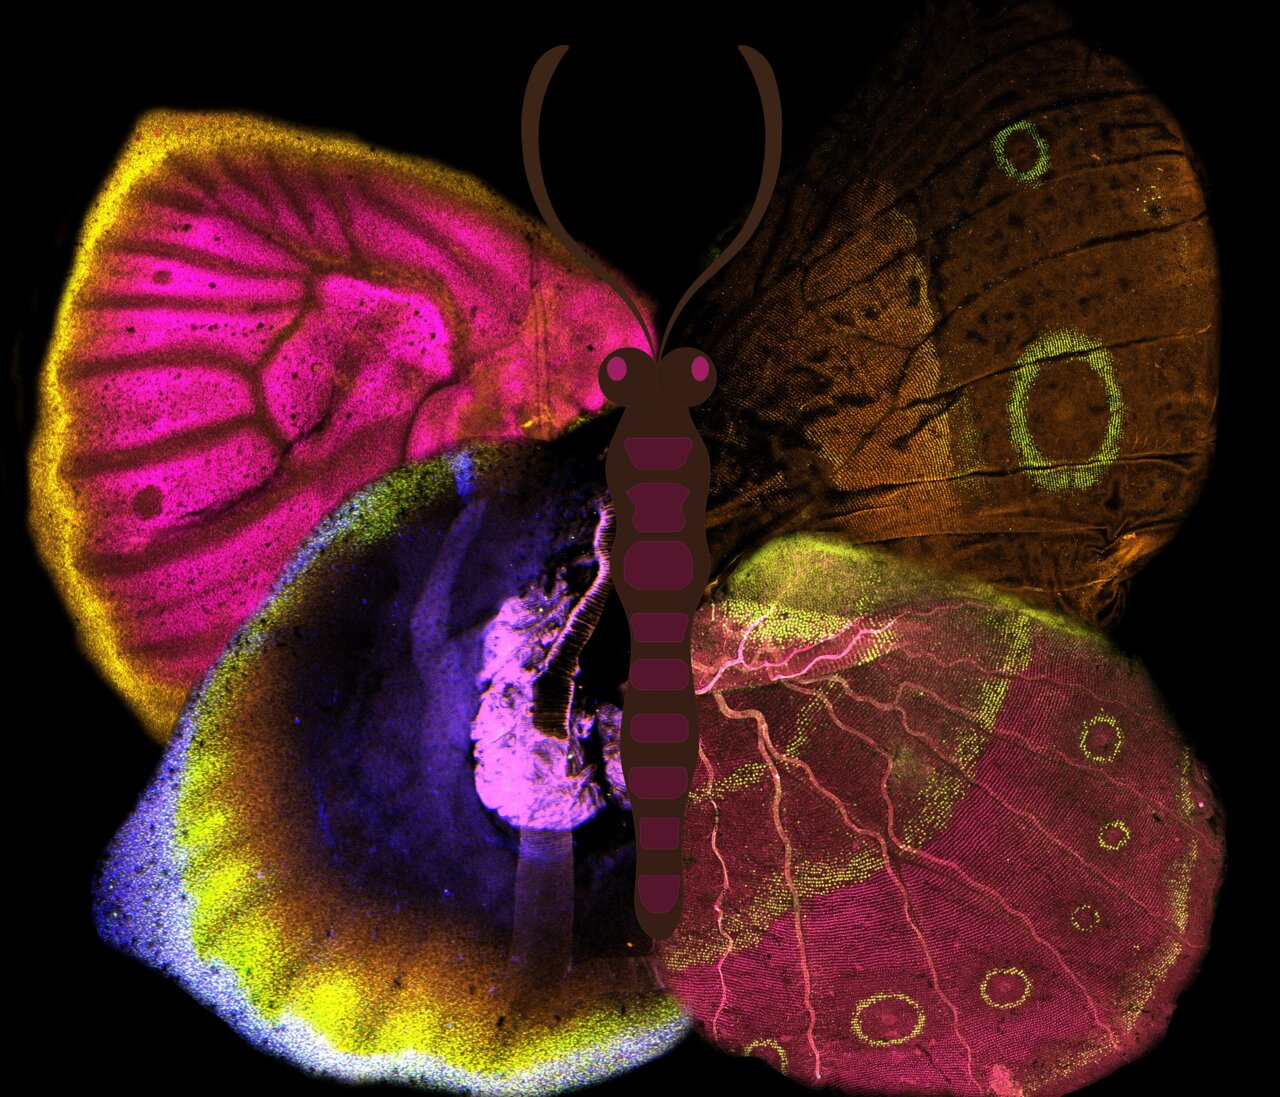 Butterfly wing patterns emerge from ancient 'junk' DNA